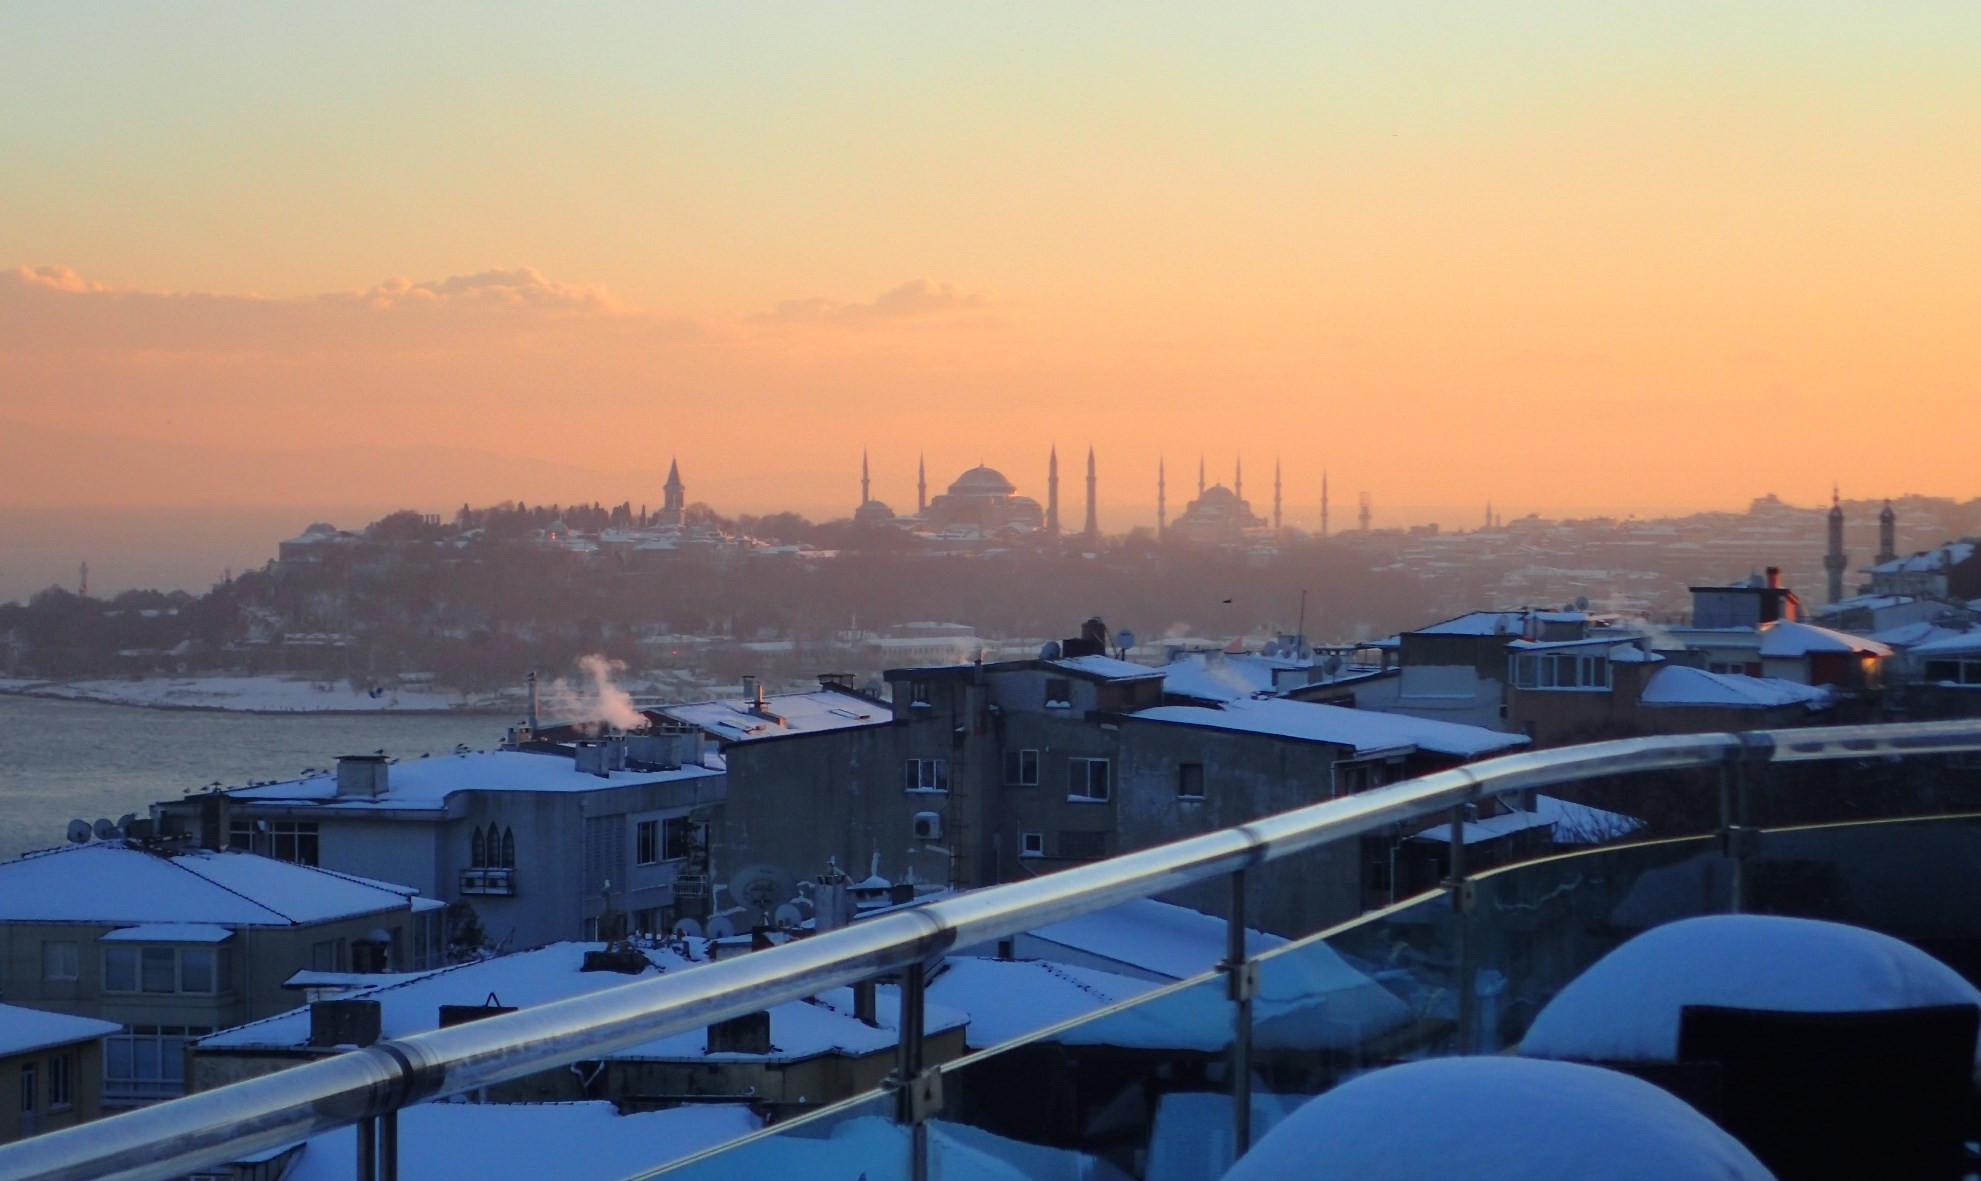 Winter sunset over the grand domes of Hagia Sophia, Topkapi Palace, and the Blue Mosque in Istanbul's old city, Turkiye